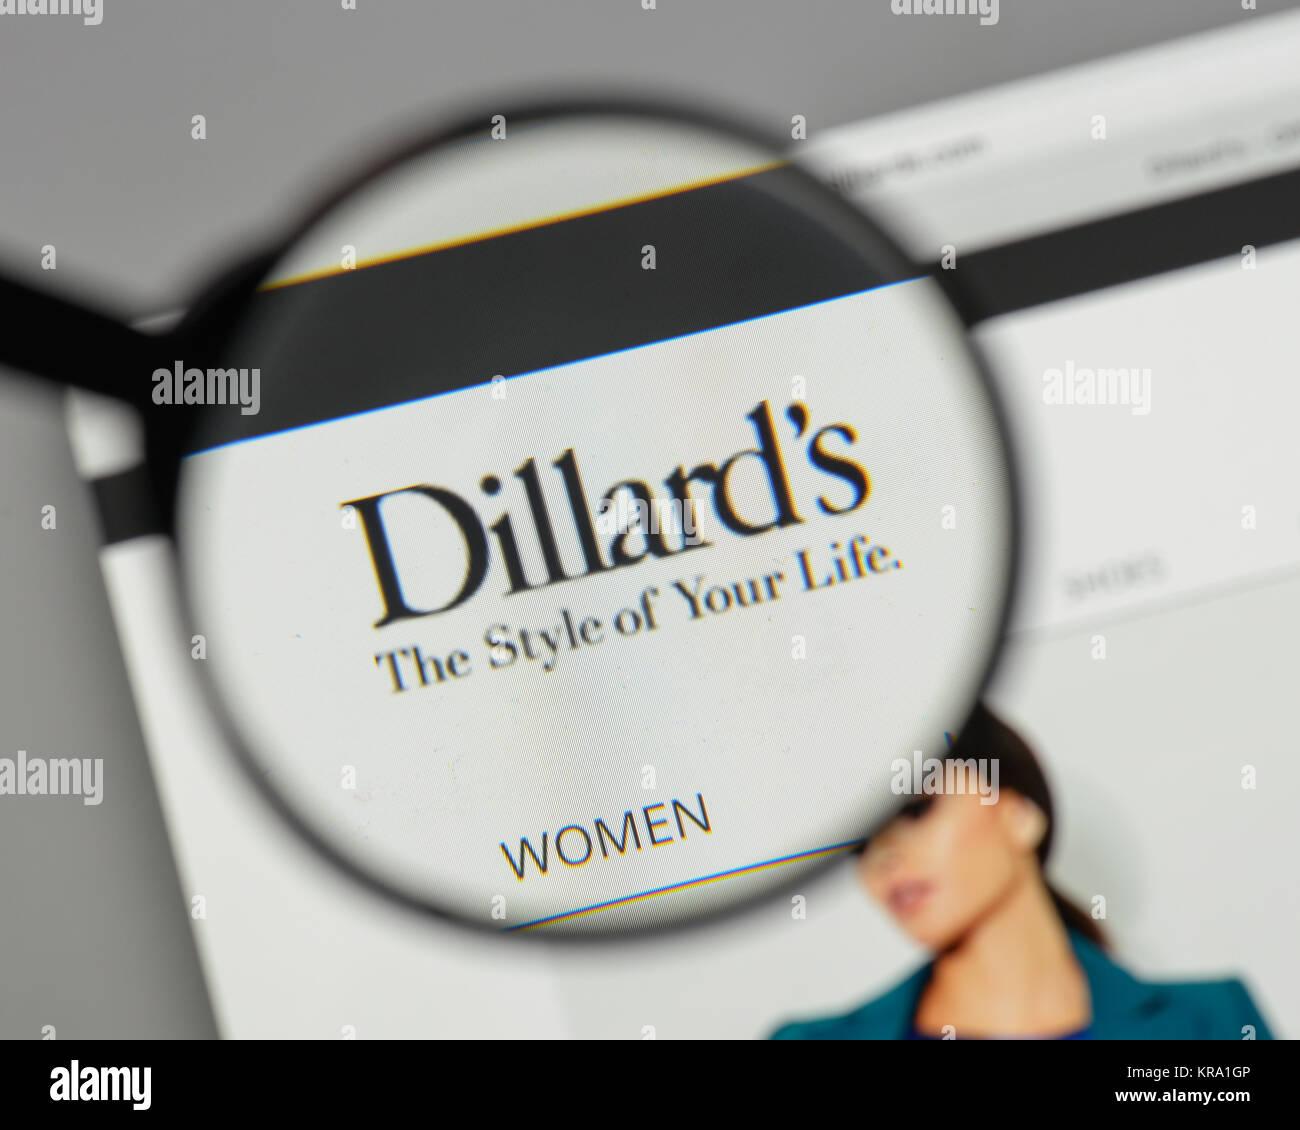 Dillard's-The Style of Your Life: Official Site of Dillards